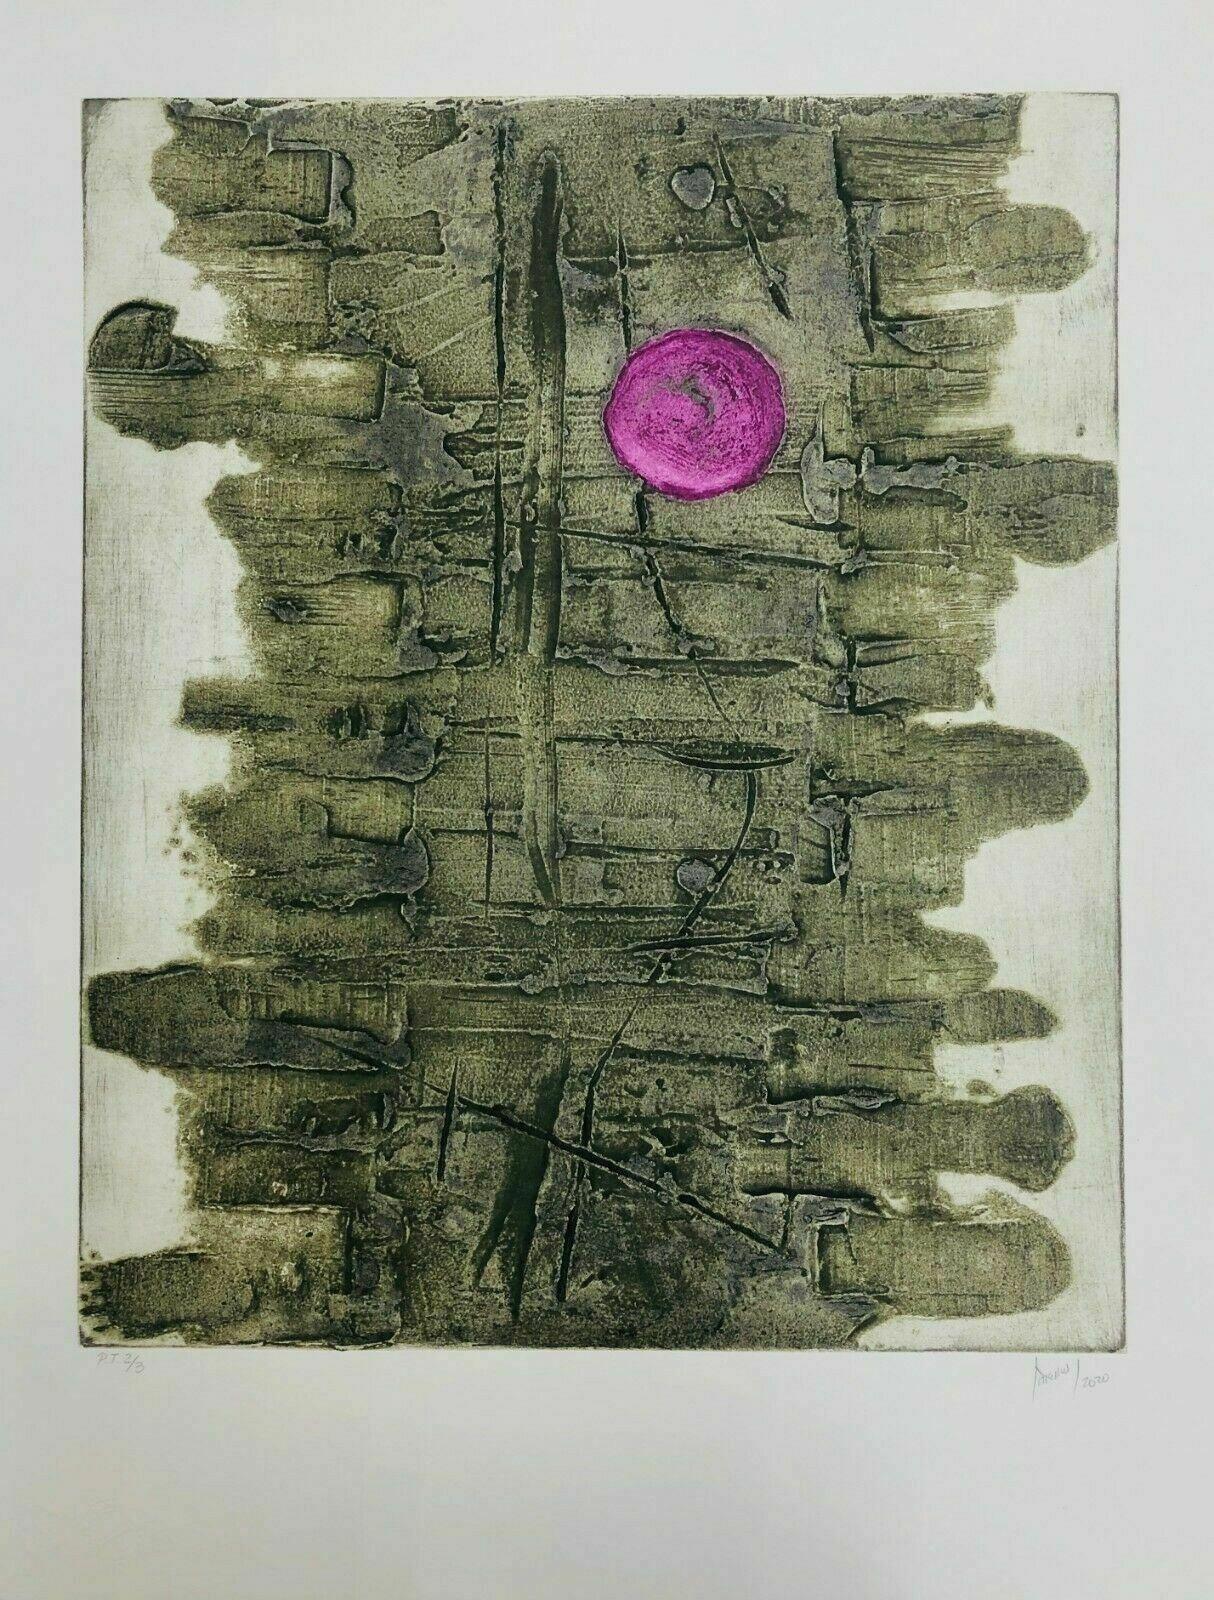 Adan Paredes (Mexico, 1961)
'Untitled 2', 2020
collagraph on paper Feltmark 300 g
28.4 x 22.1 in. (72 x 56 cm.)
Edition of 40
ID: PAD-102
Unframed